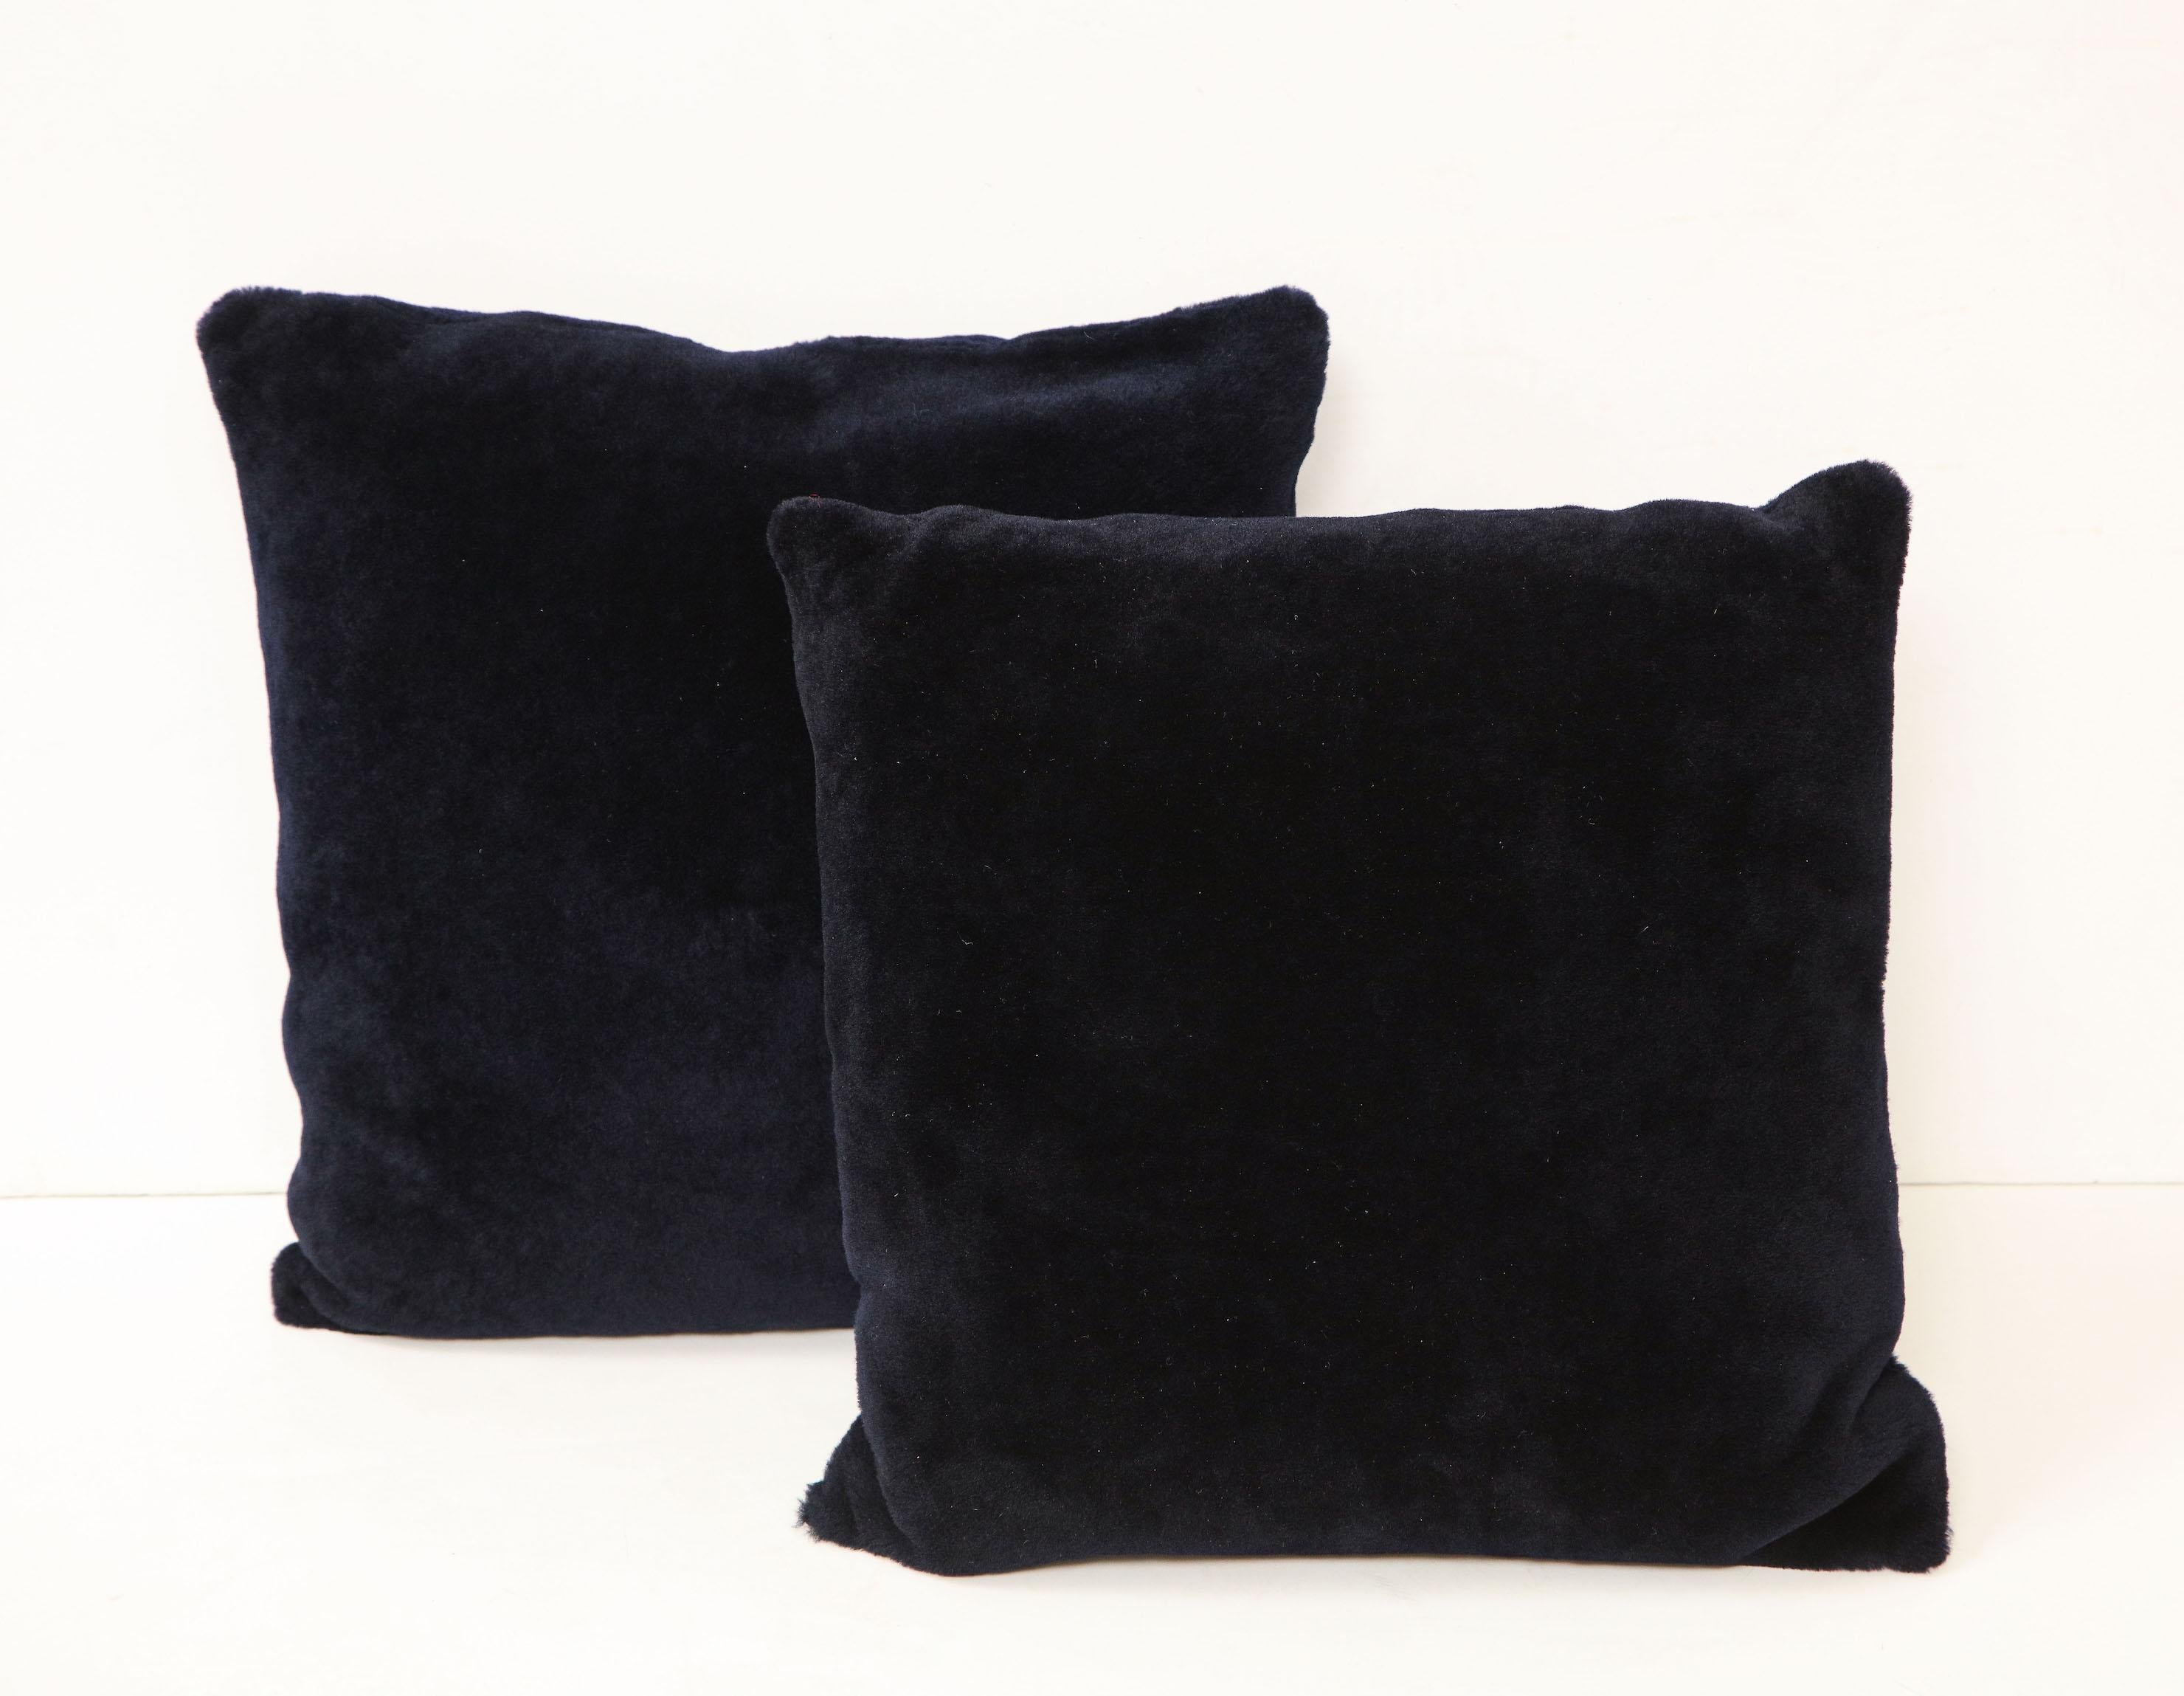 Double sided Merino short hair shearling pillow in midnight blue color. Beautiful accessory piece with rich and deep color. It is made of genuine shearing with a zipper enclosure in a matching color, filled with down and feather, and 18